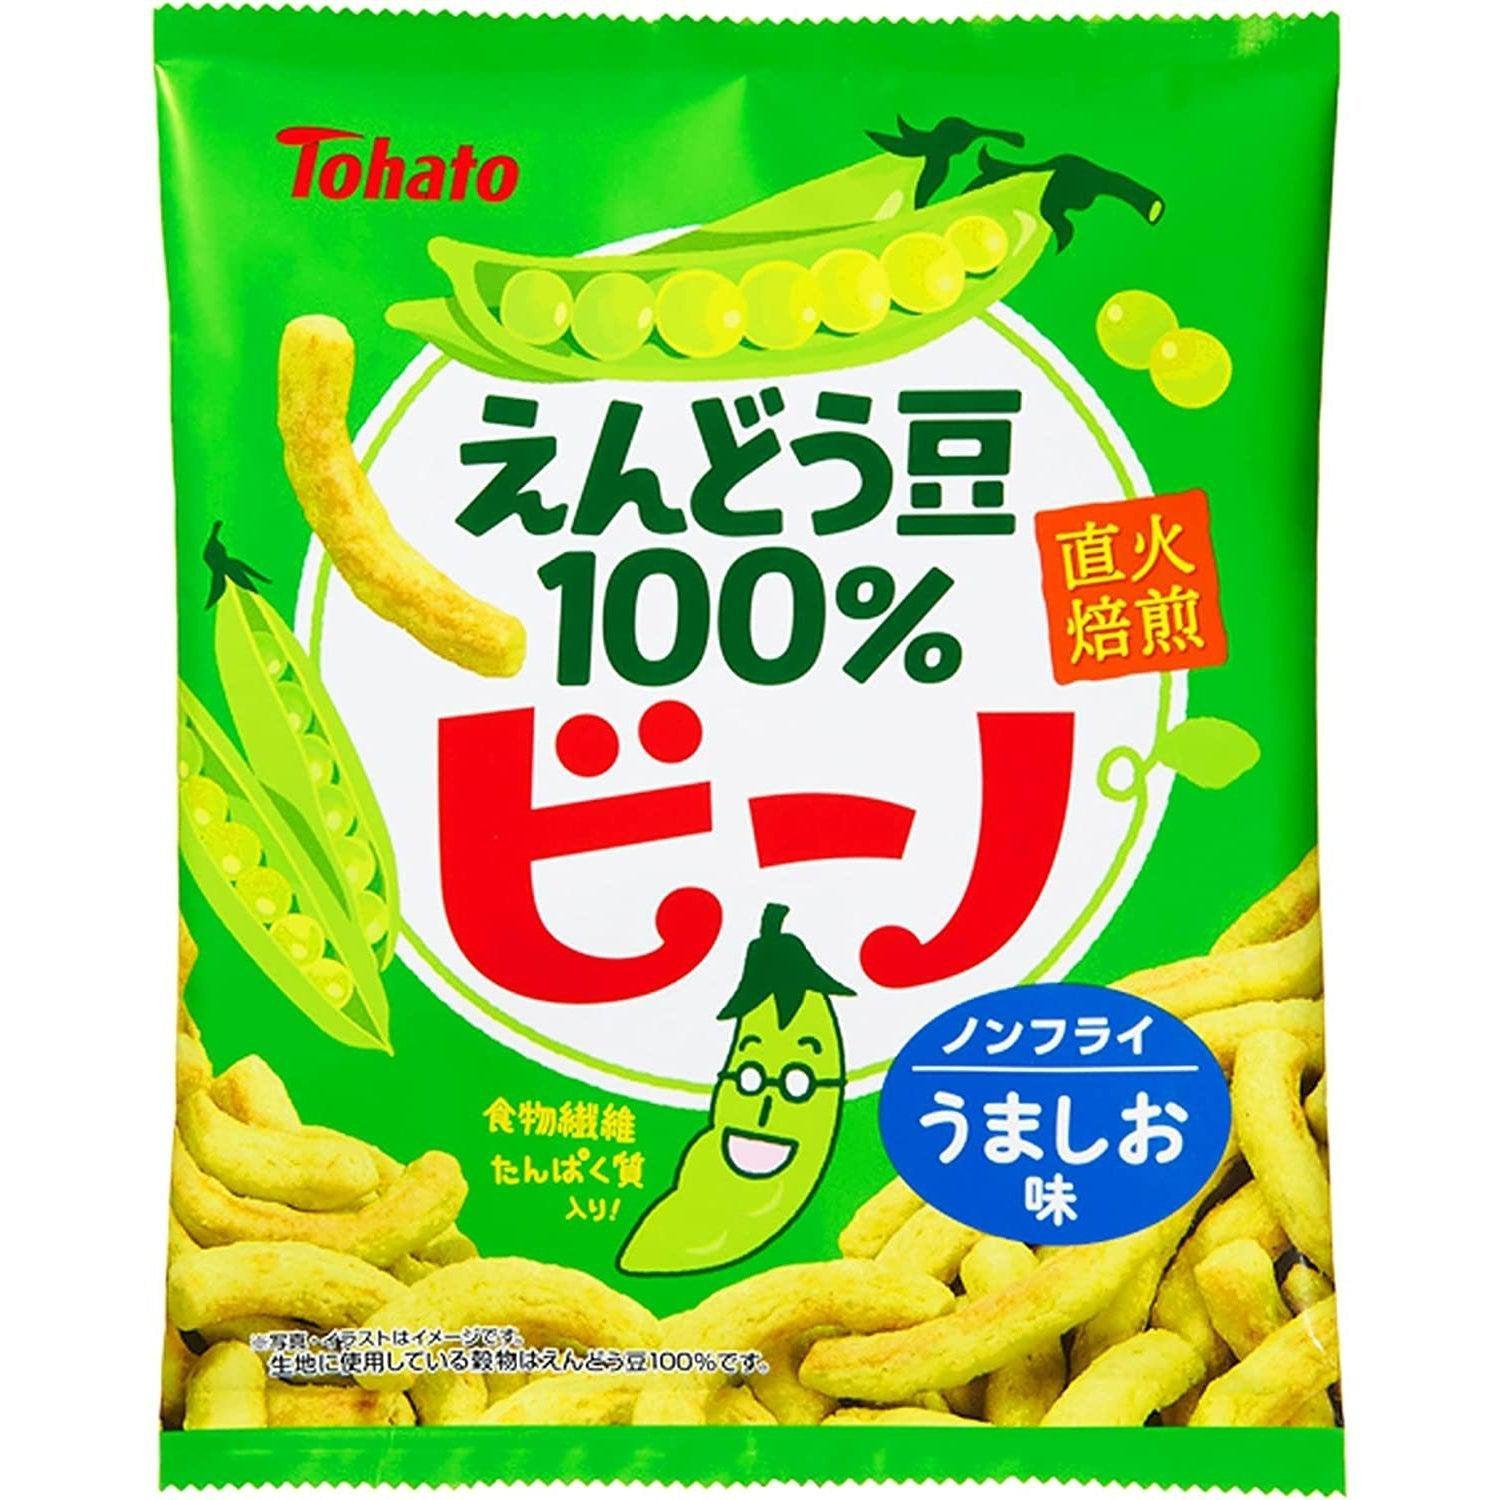 Tohato Beano Fire Roasted Green Pea Chips 61g (Pack of 12)